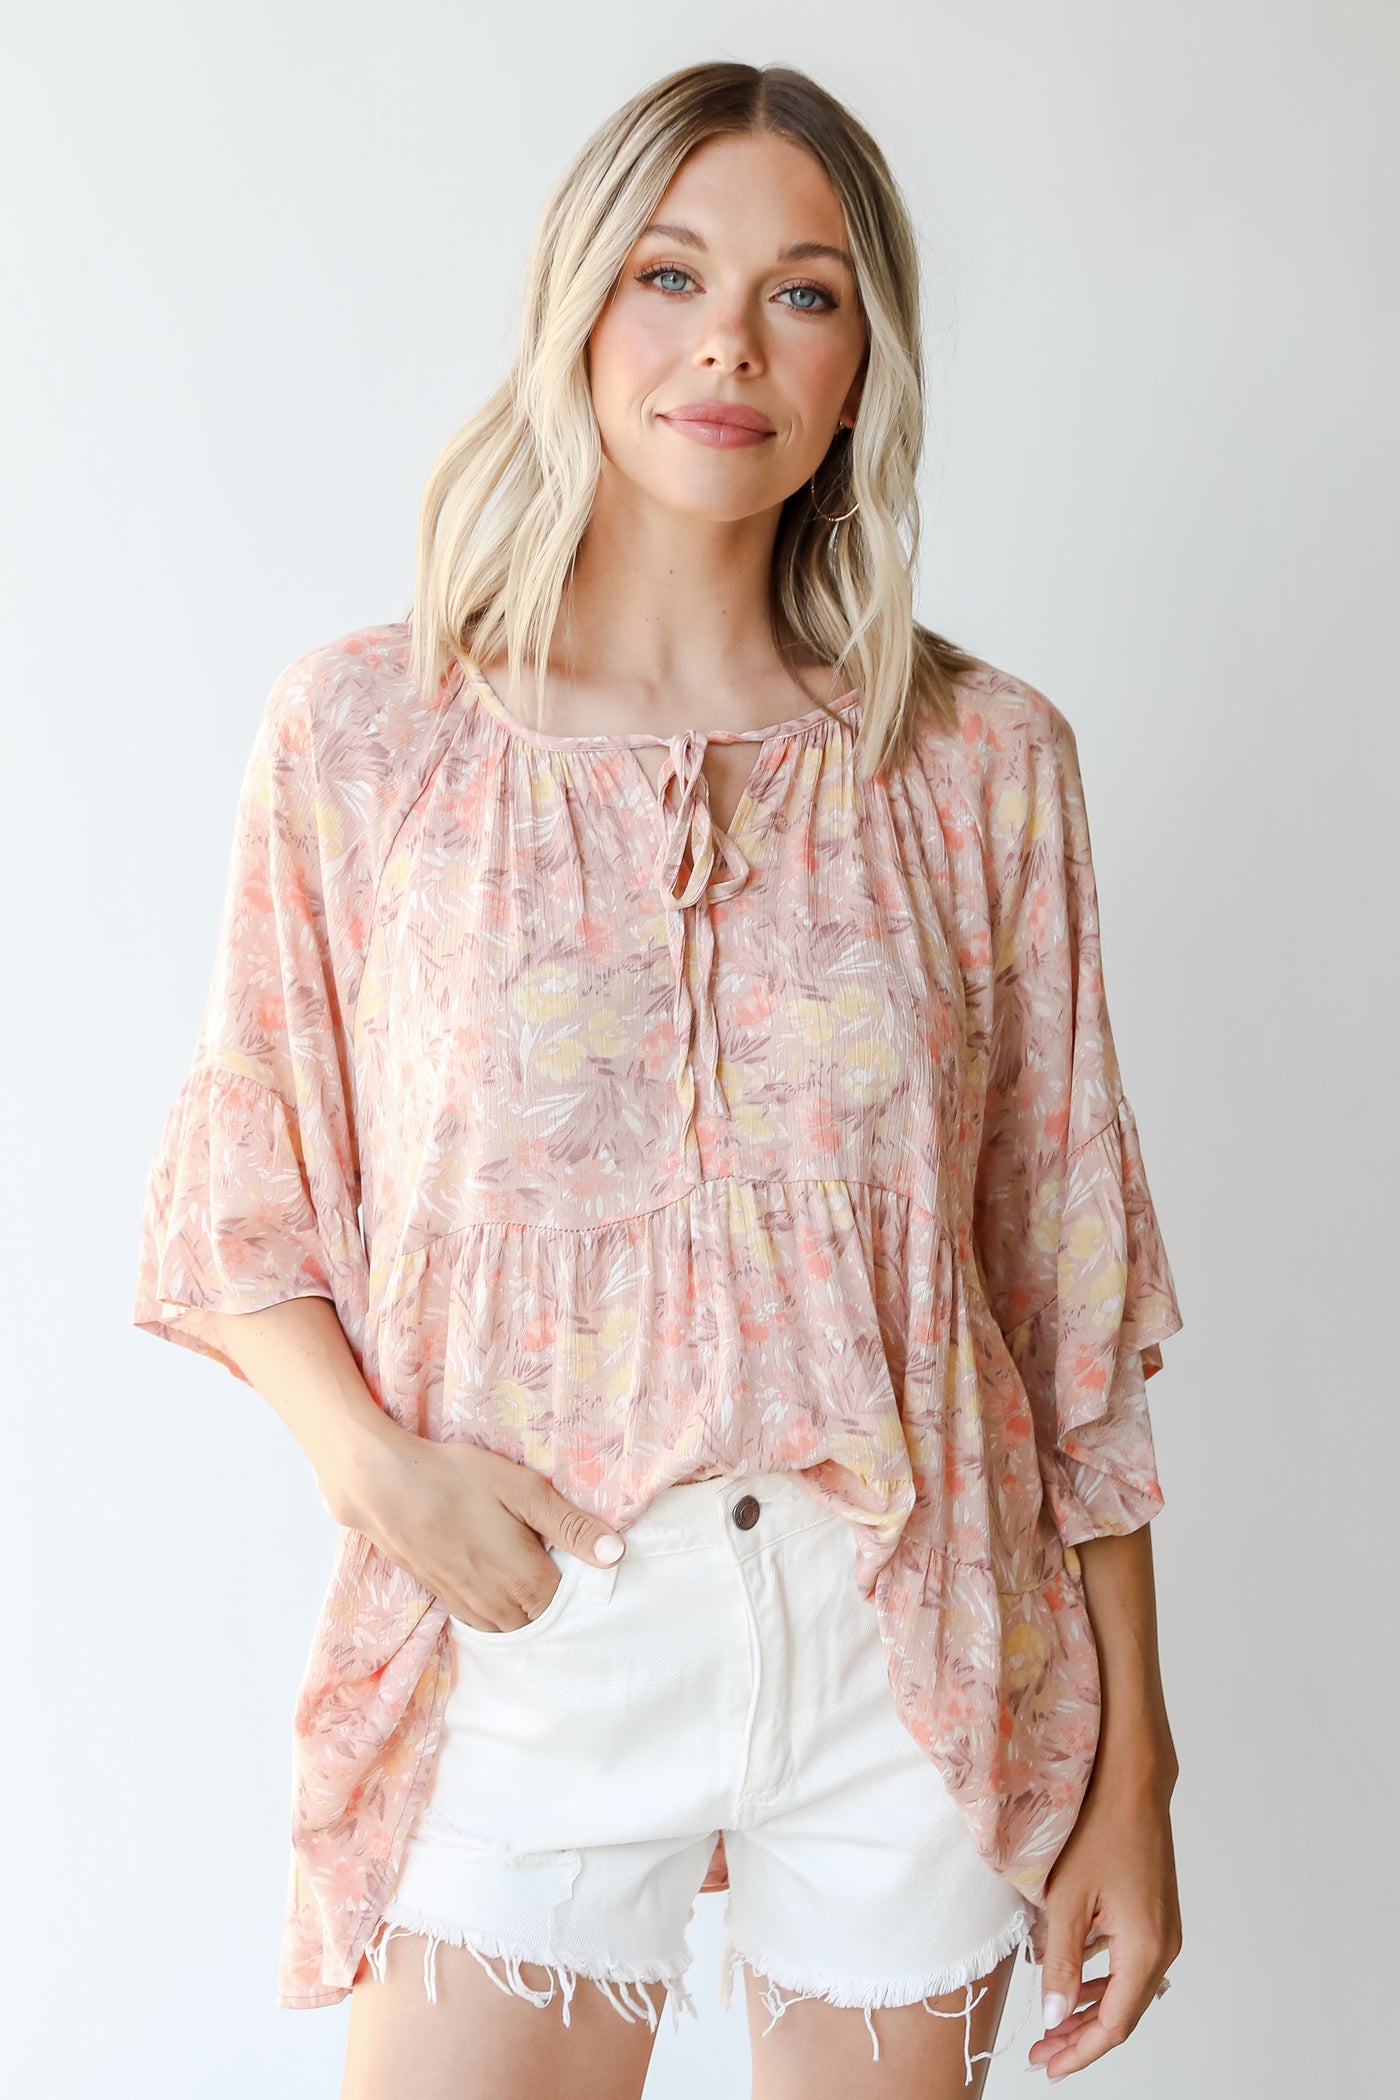 Floral Blouse from dress up